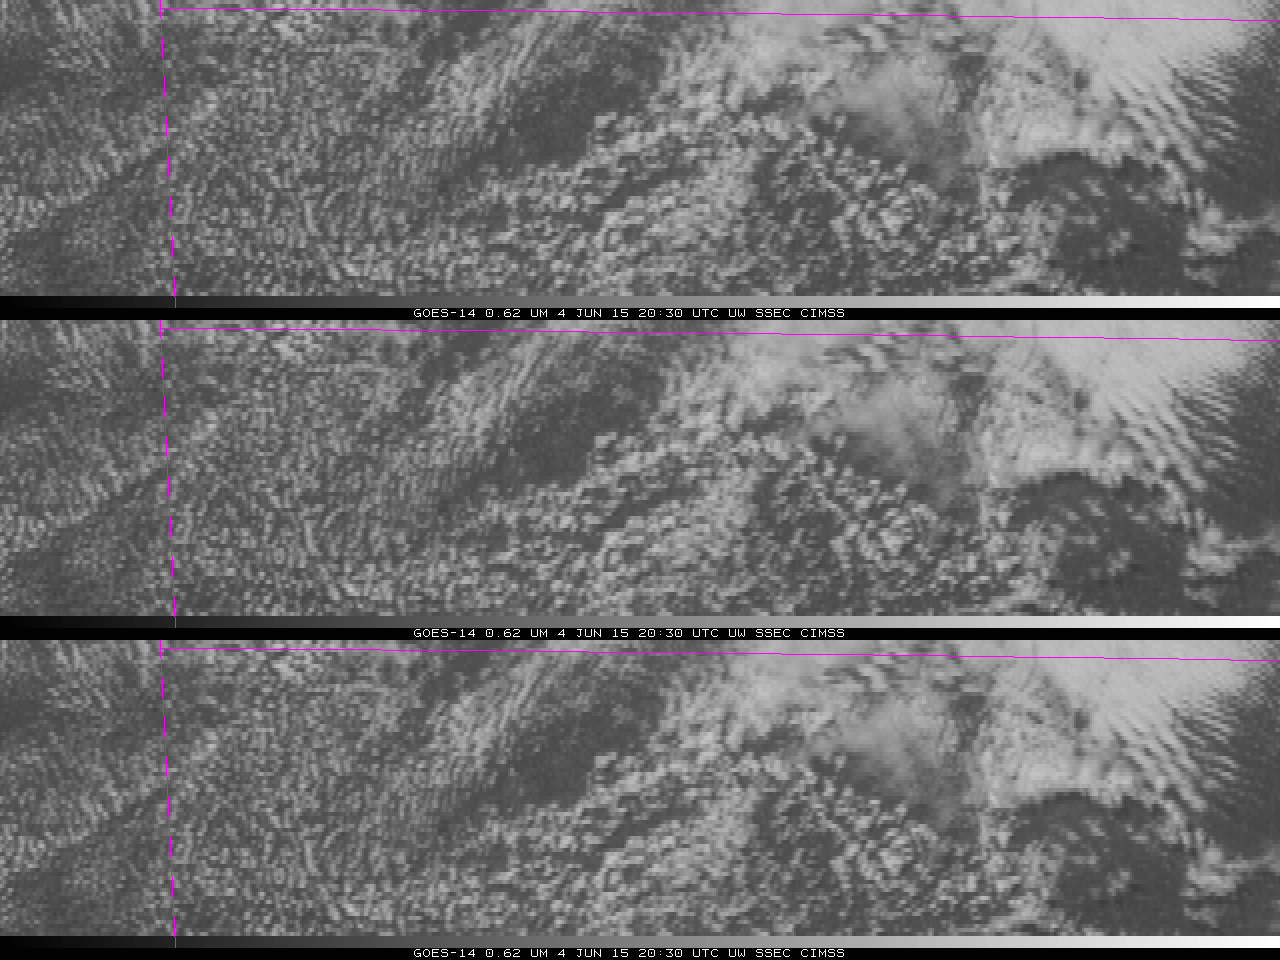 GOES-14 Visible (0.6263 µm) Imagery, 4 June 2015, with 1-minute time-steps (top), 5-minute time-steps (middle) and routine 15-minute GOES time-steps (bottom) (click to play animation)